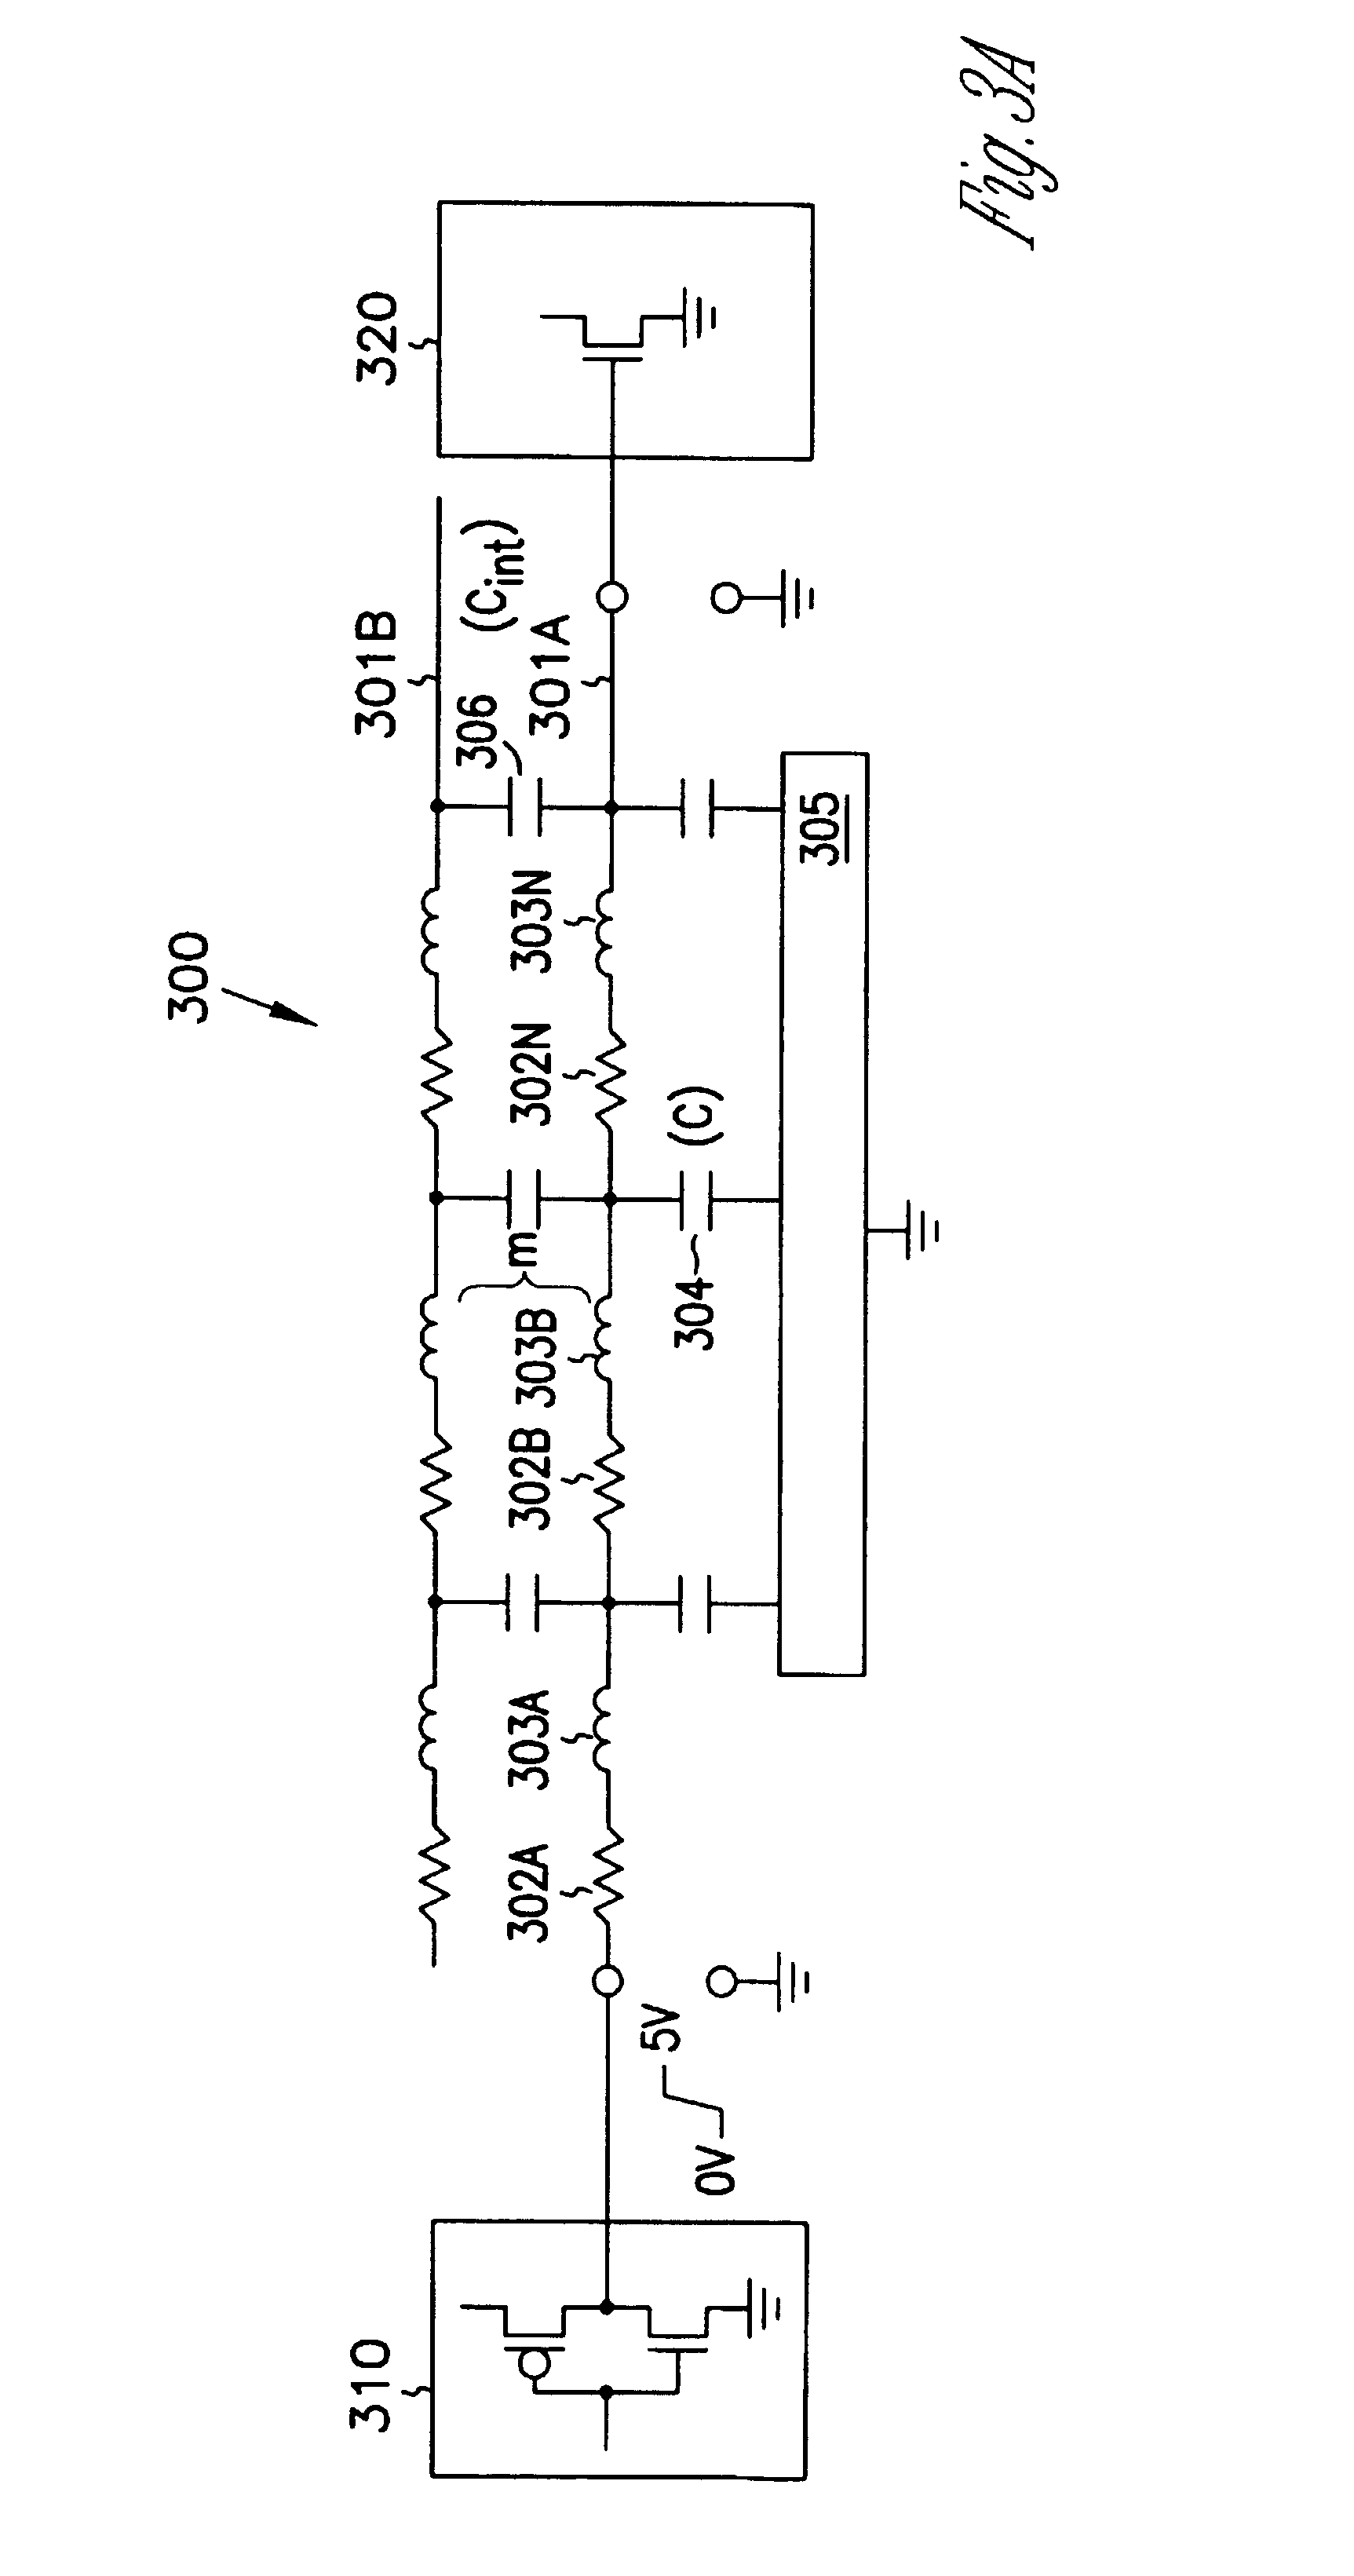 High permeability thin films and patterned thin films to reduce noise in high speed interconnections